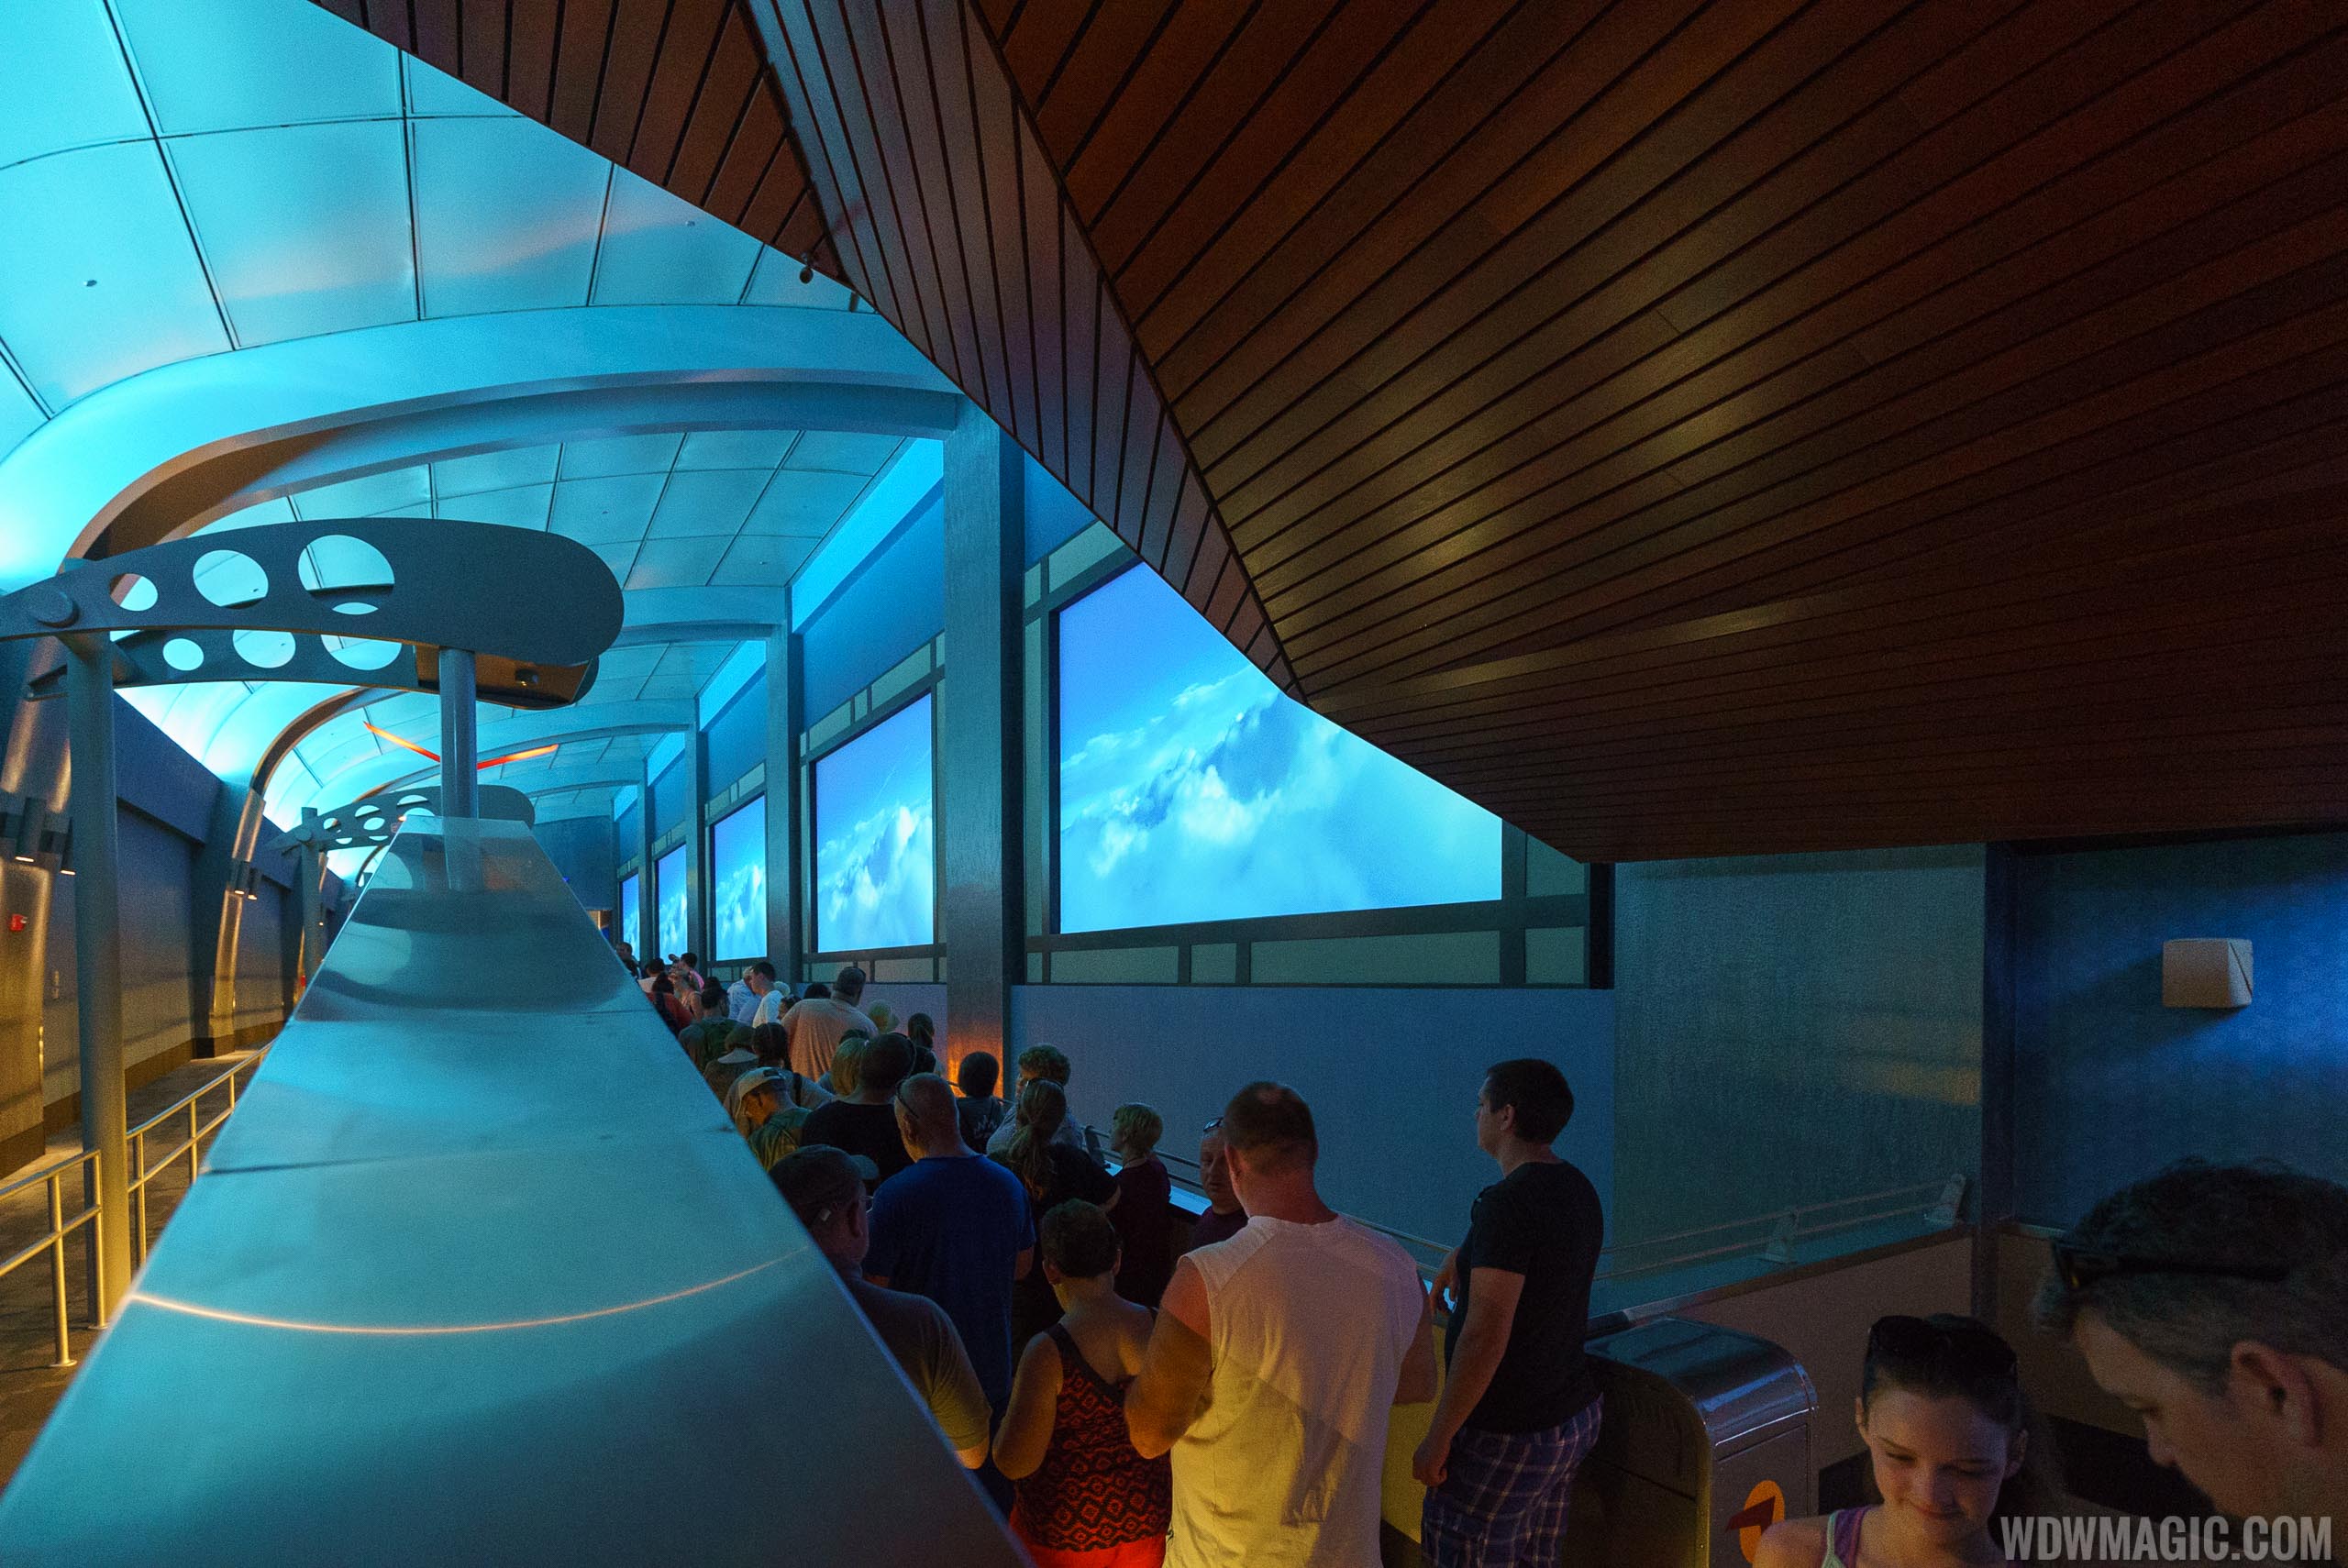 PHOTOS Soarin' reopens at Epcot with third theater and new projectors